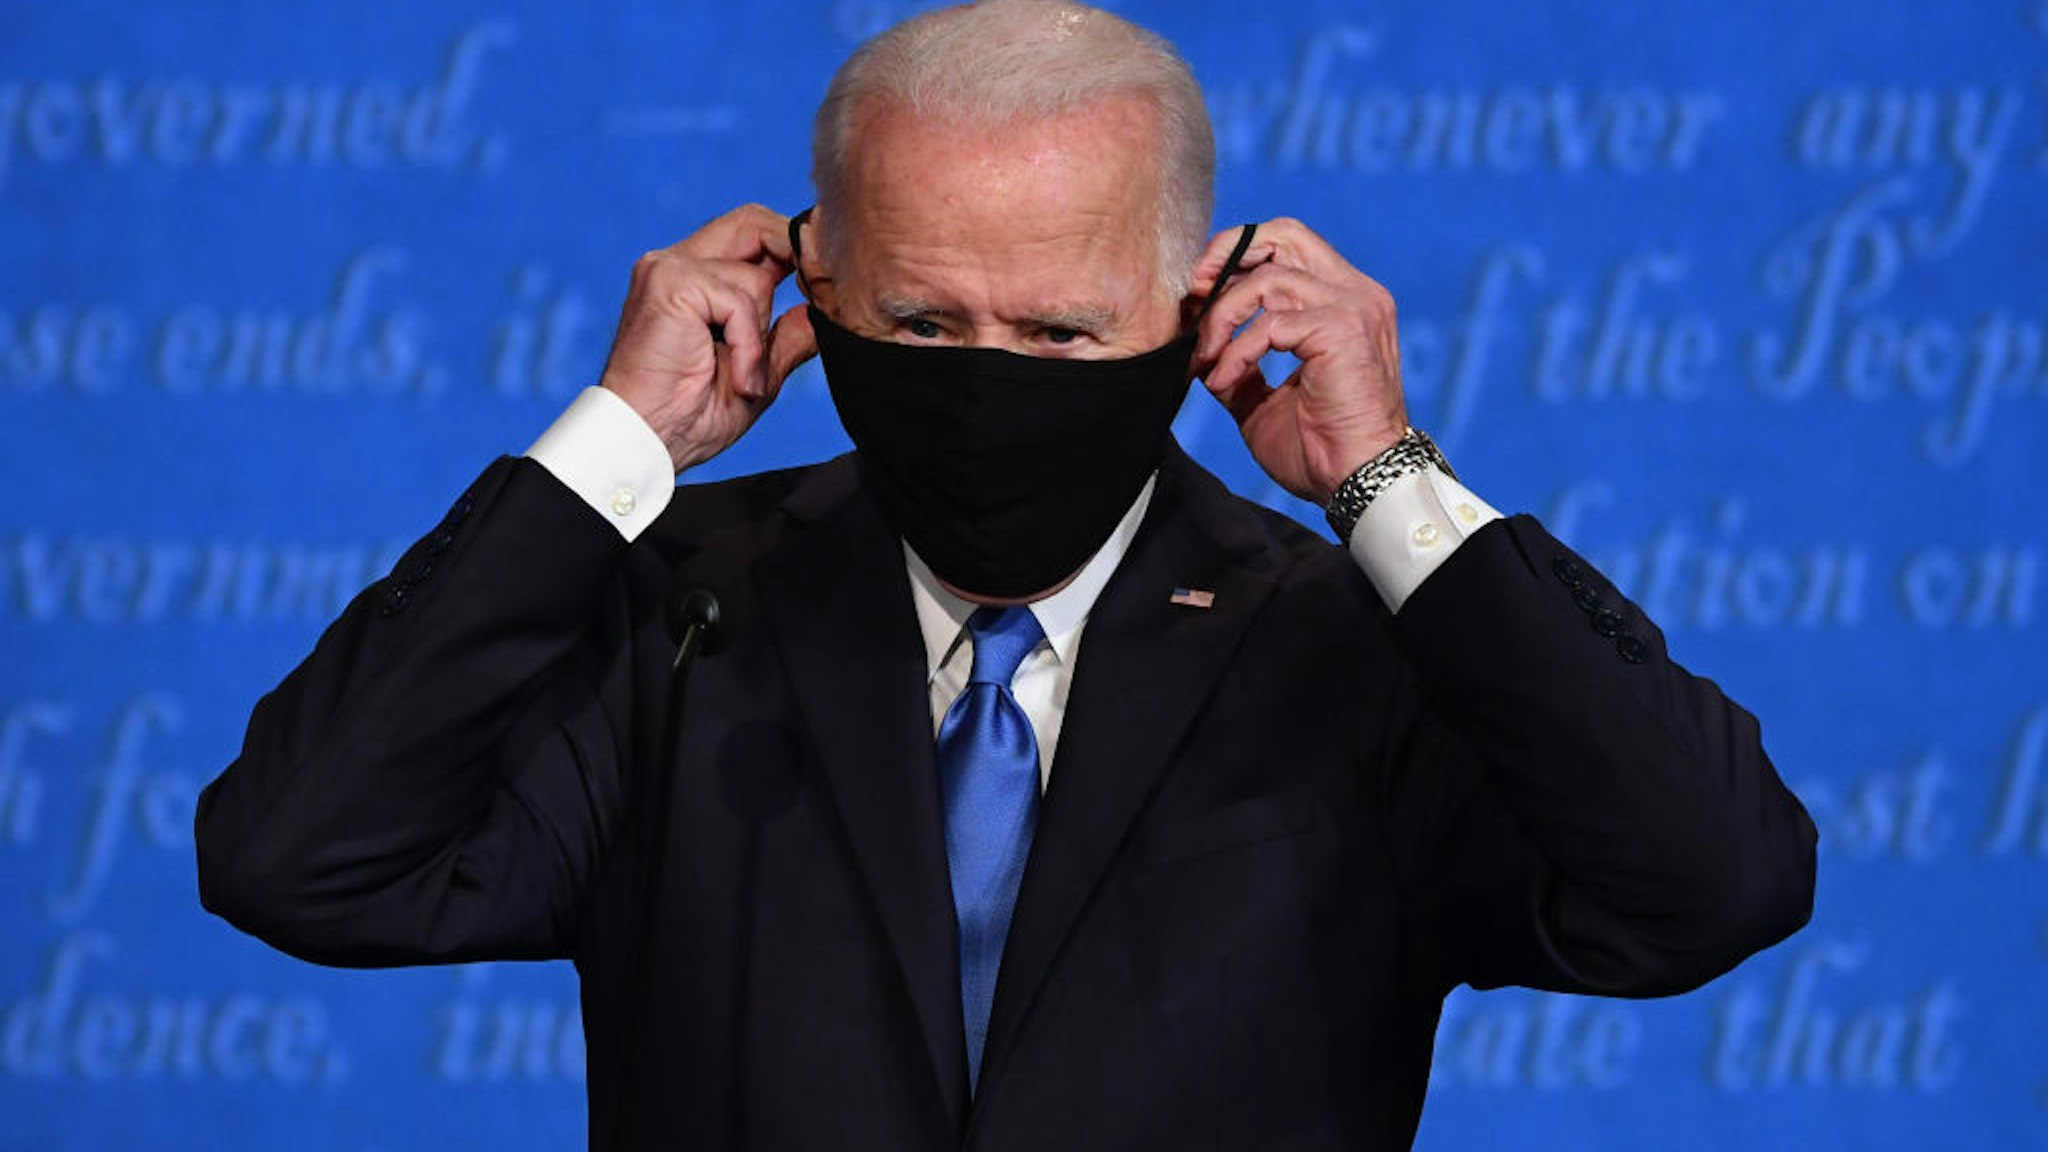 Joe Biden, 2020 Democratic presidential nominee, puts on a protective mask during the U.S. presidential debate at Belmont University in Nashville, Tennessee, U.S., on Thursday, Oct. 22, 2020. Trump and Biden traded charges of secretly taking money from foreign interests, after the former vice president addressed head-on Trump’s efforts to portray him as corrupt. Photographer: Kevin Dietsch/UPI/Bloomberg